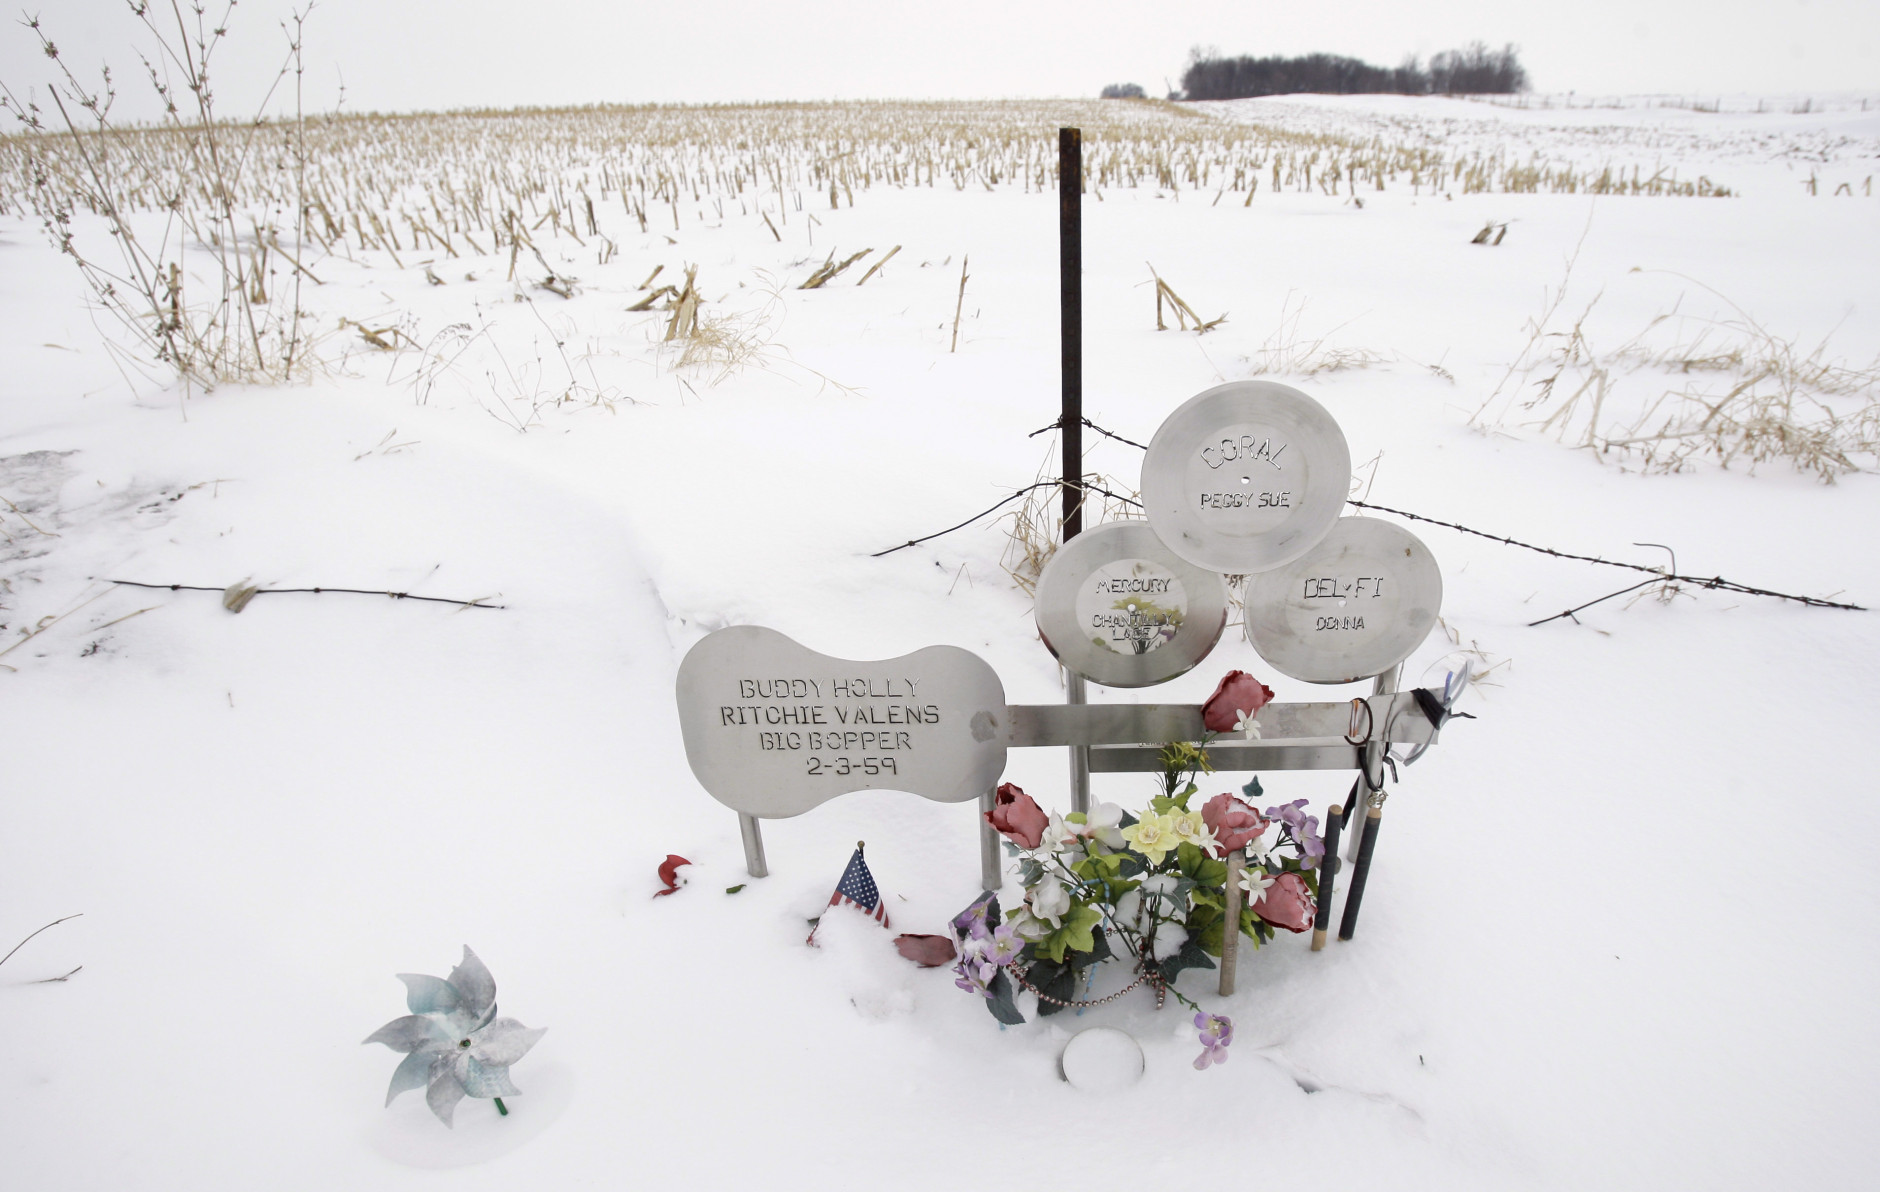 FILE - In this Friday, Jan. 9, 2009 file photo, flowers adorn a memorial at the spot where the plane carrying Buddy Holly, Ritchie Valens and J.P. "The Big Bopper" Richardson crashed killing all aboard on Feb. 3, 1959, near Clear Lake, Iowa. The three young singers were in a single-engine aircraft flying in a light snowstorm in 1959 when the pilot apparently lost control. Holly decided to fly because his tour bus was having heating problems. (AP Photo/Charlie Neibergall, File)